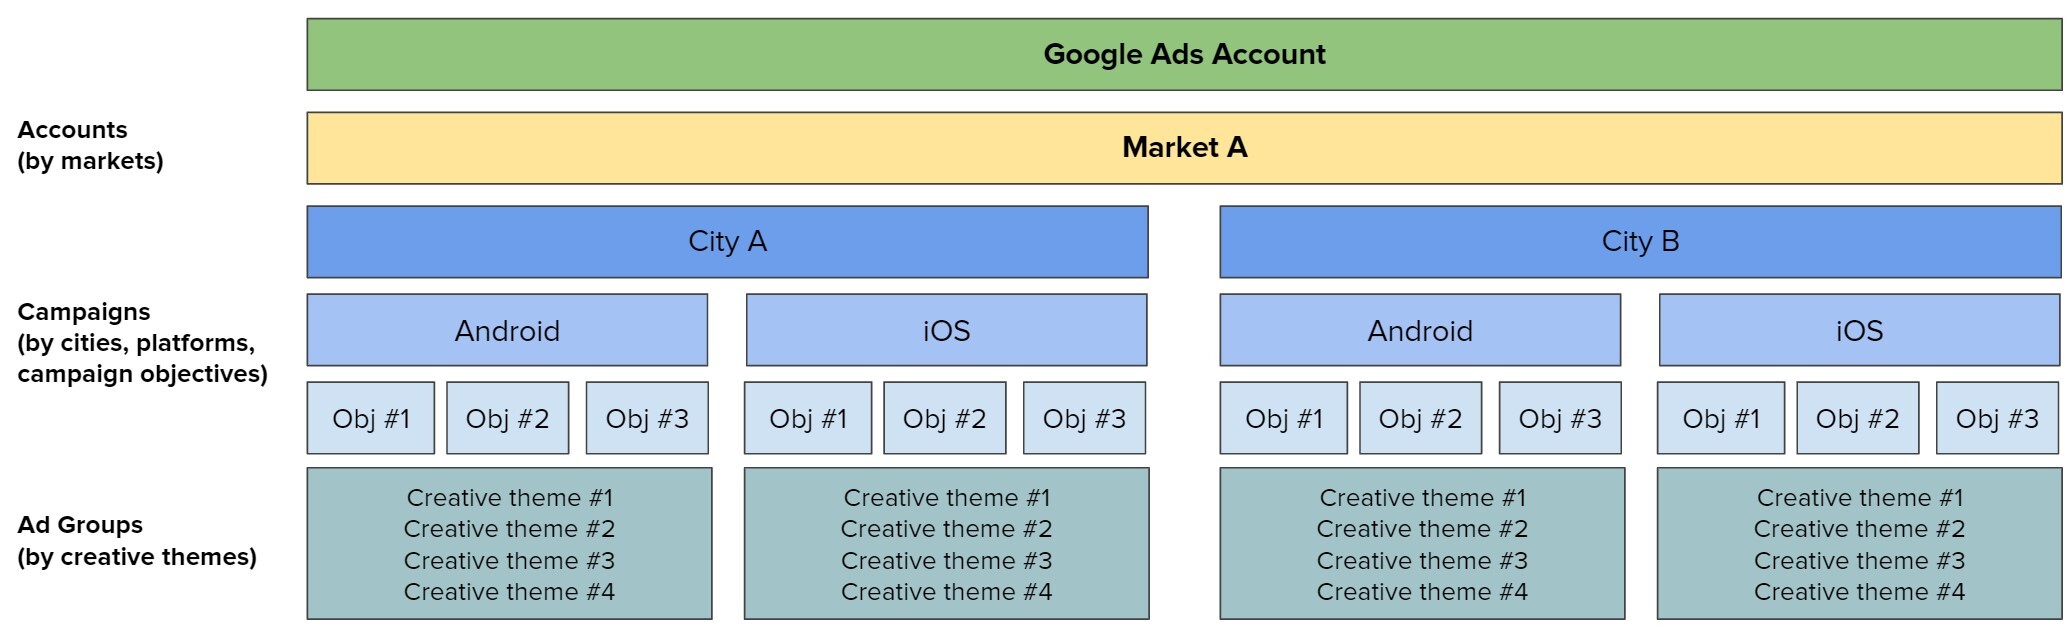 Sample Google Ads account structure